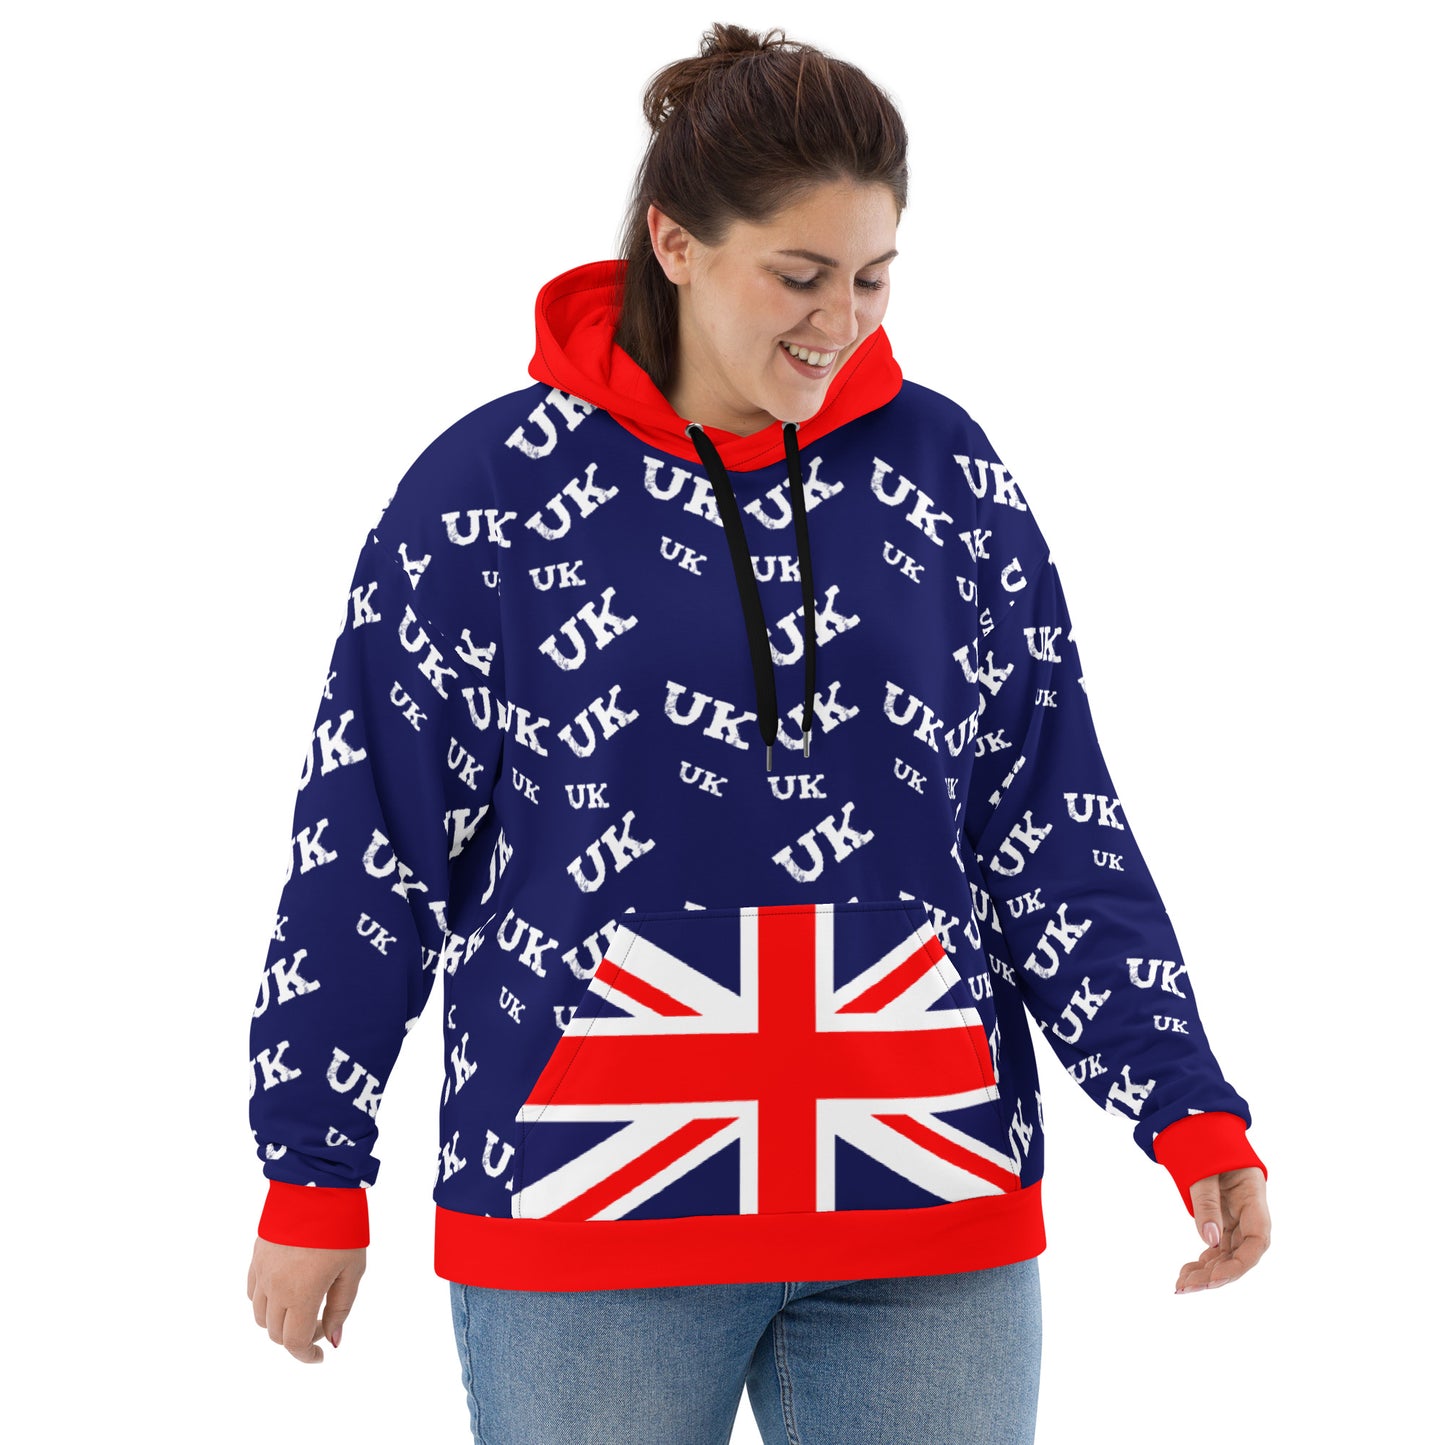 Show Your British Pride with this Plus Size Union Jack Hoodie